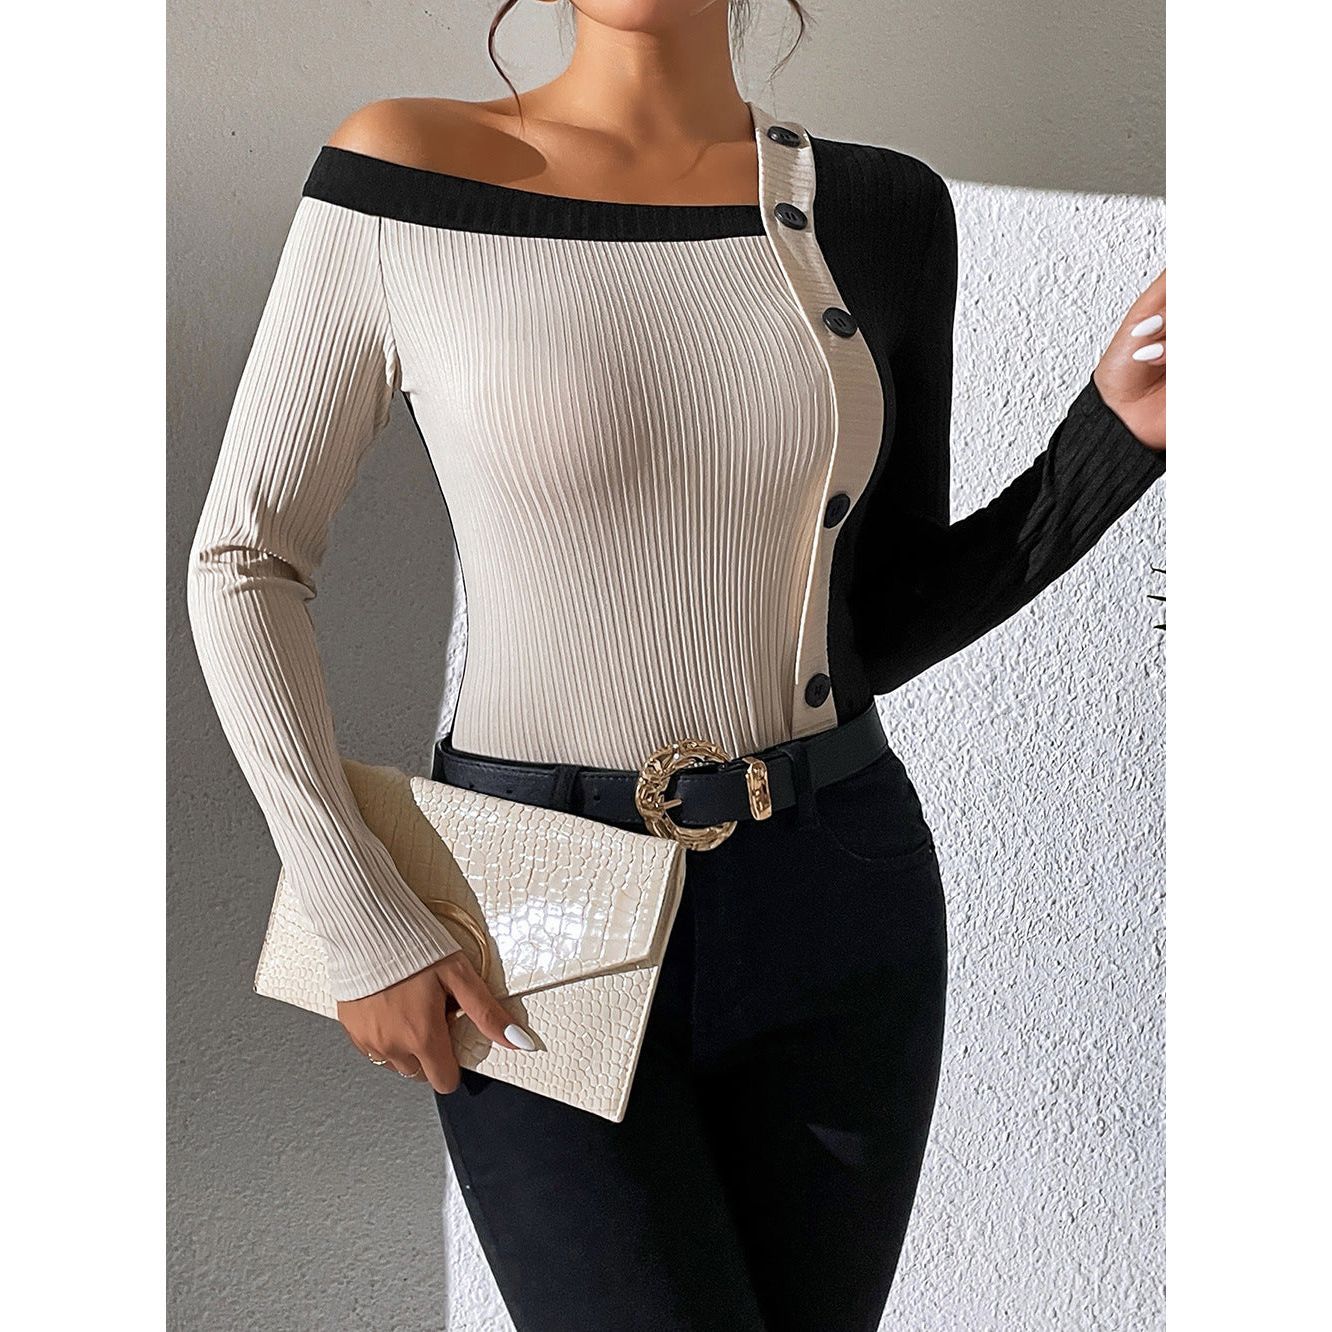 Women's Sexy Long Sleeve Off-shoulder Knitted T-shirt